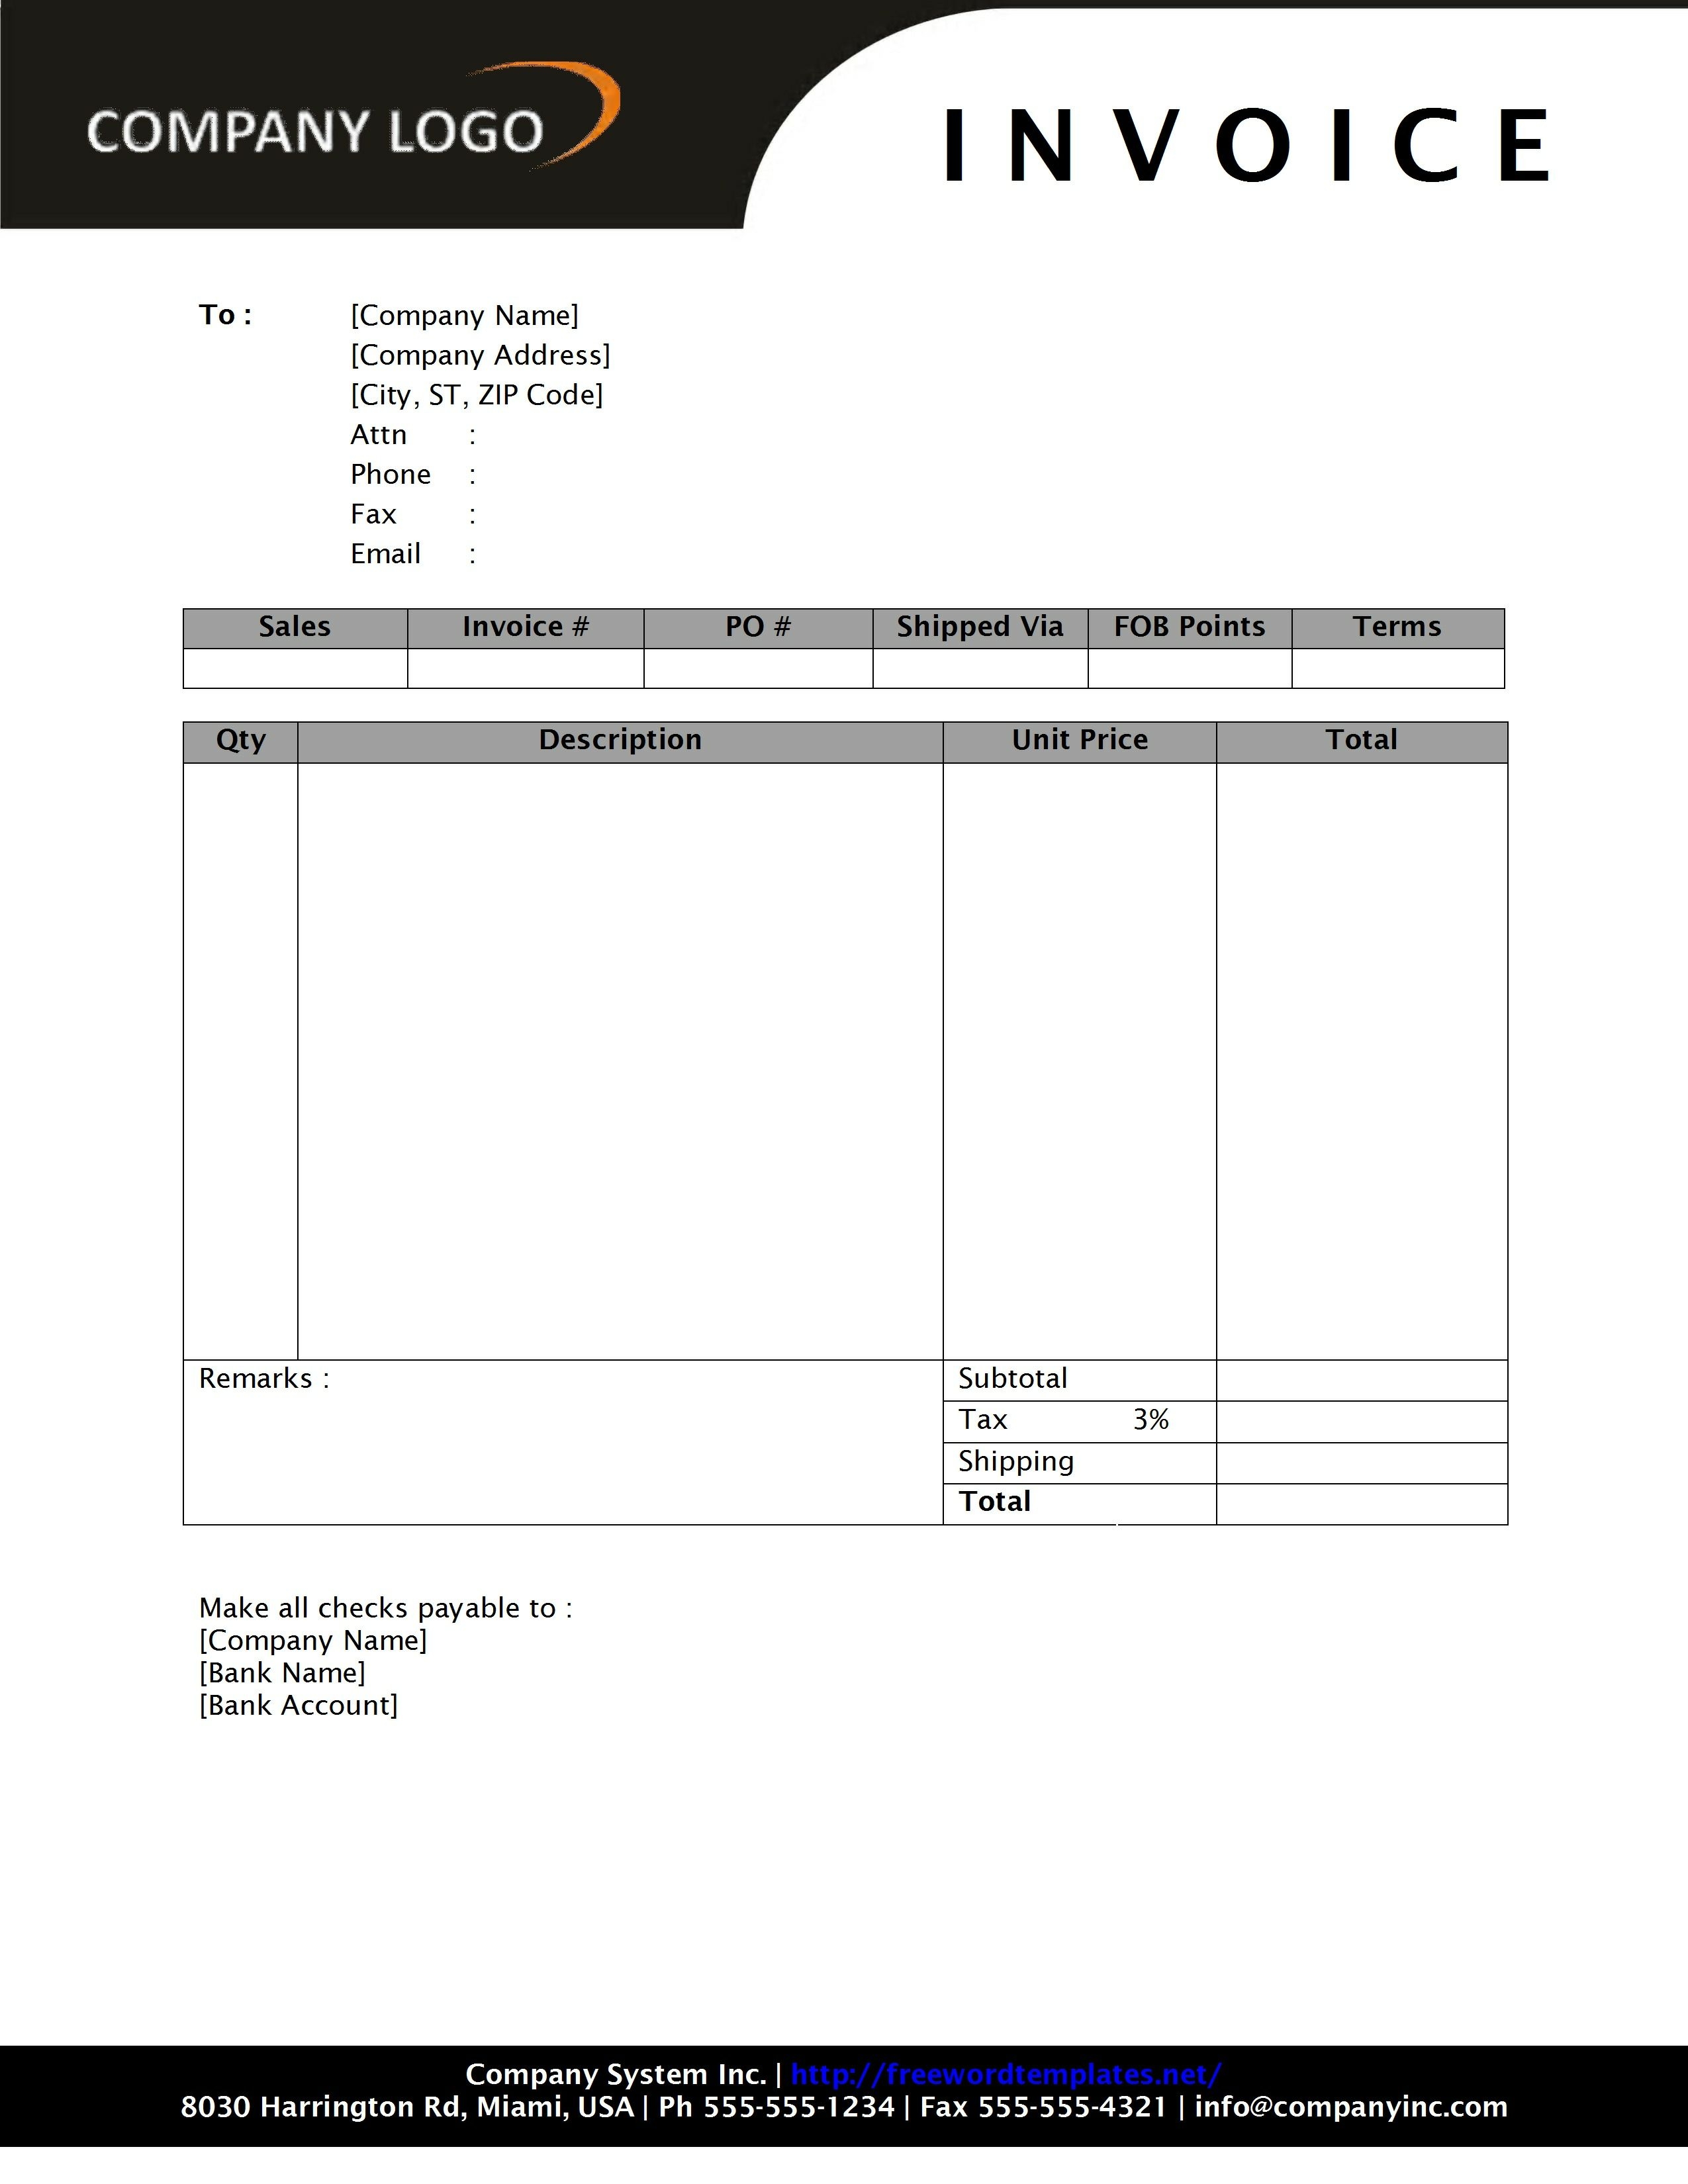 invoice word template free blank invoice word employee invoice simple invoice word